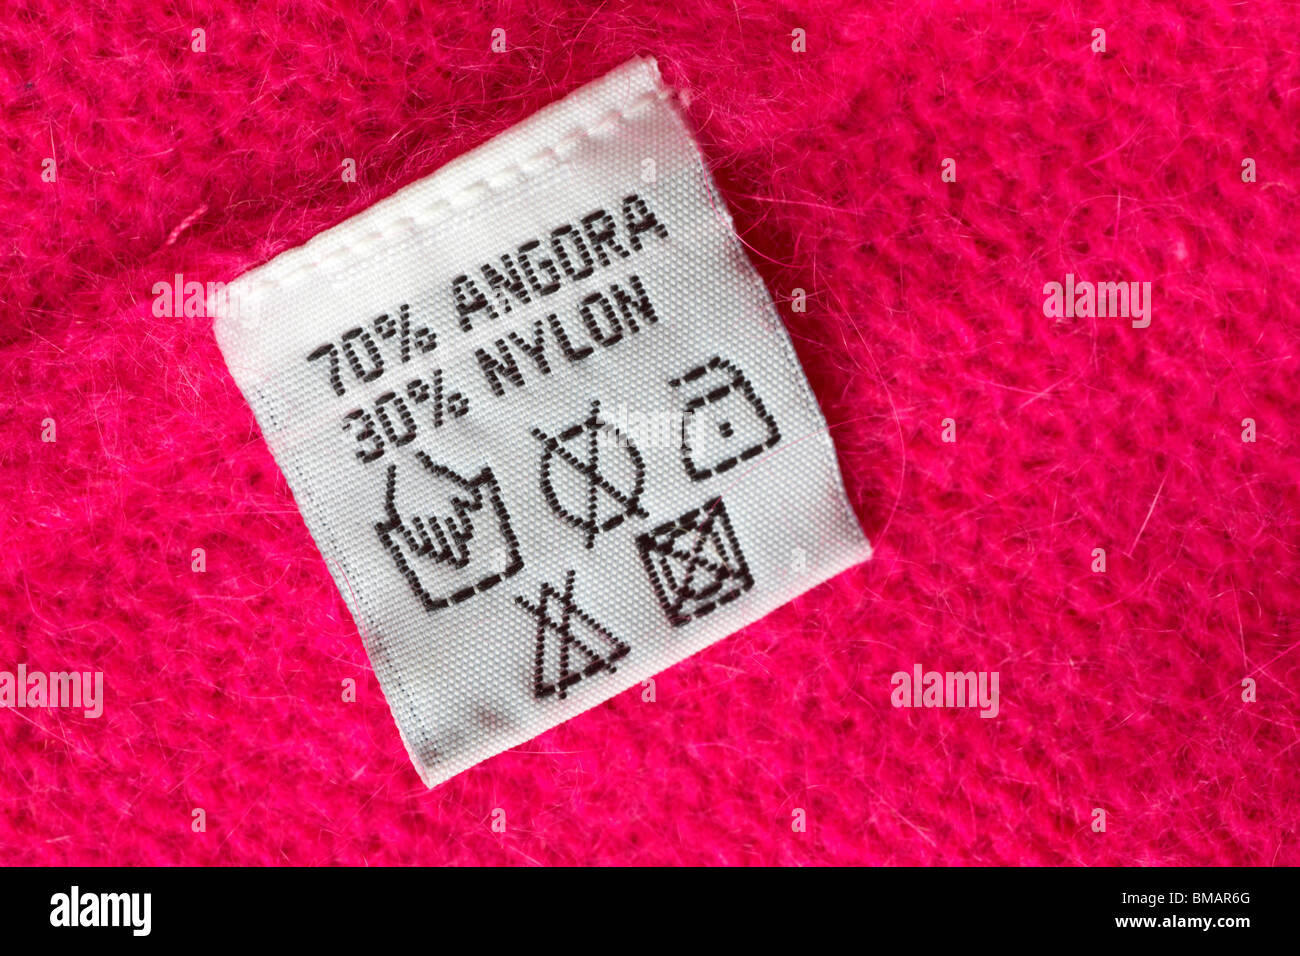 care label in pink jumper made up of 70% angora and 30% nylon Stock ...